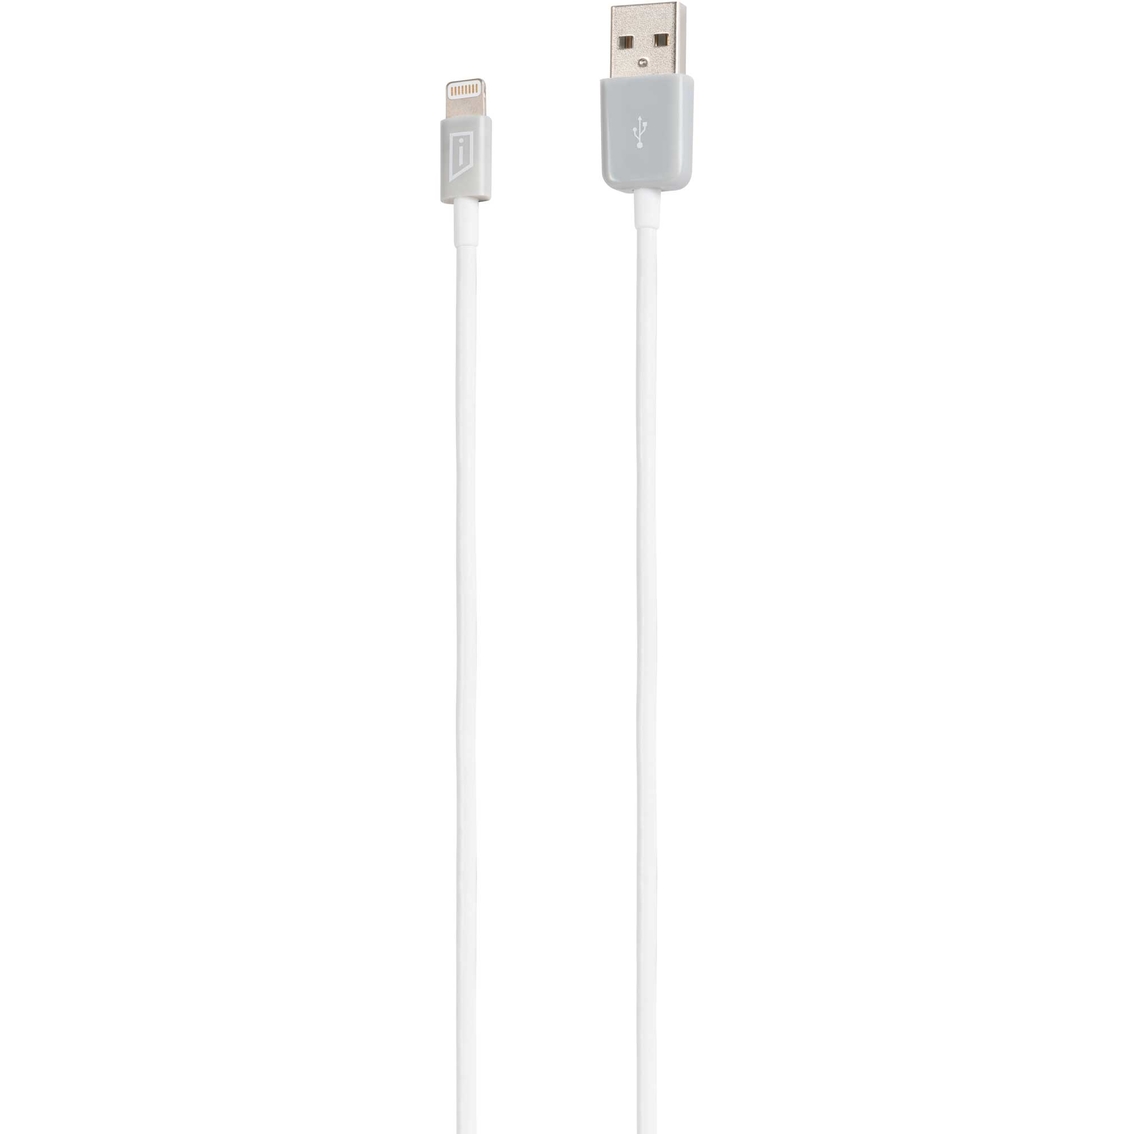 Targus iStore Lightning Charge 1.8 ft. Cable - Image 2 of 3